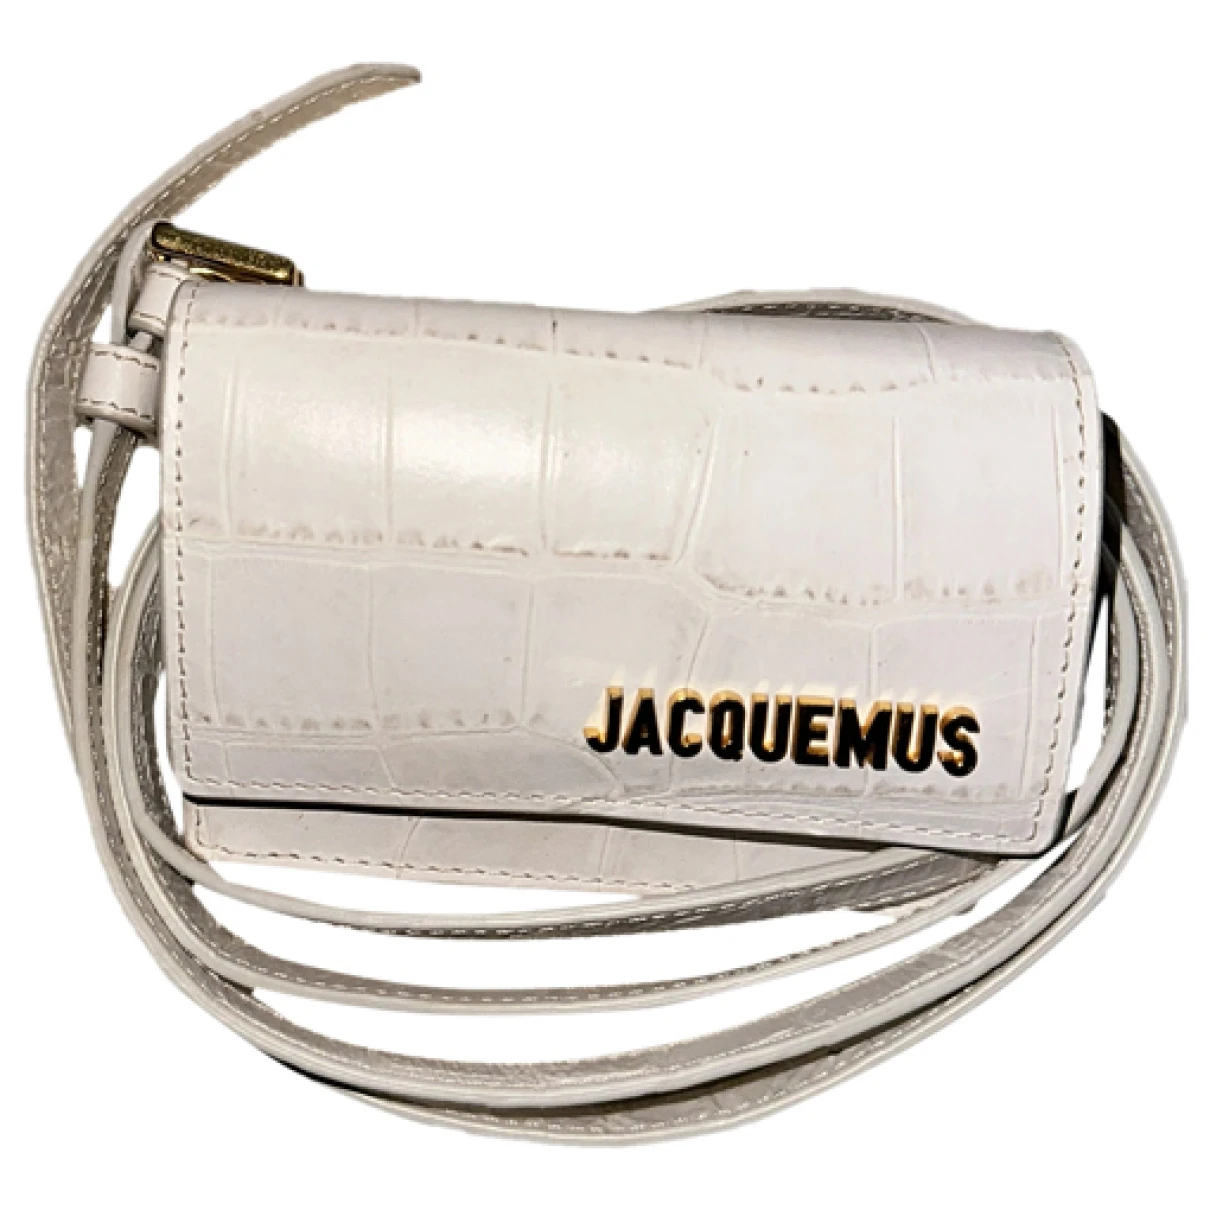 Pre-owned Jacquemus Le Bello Leather Handbag In Beige